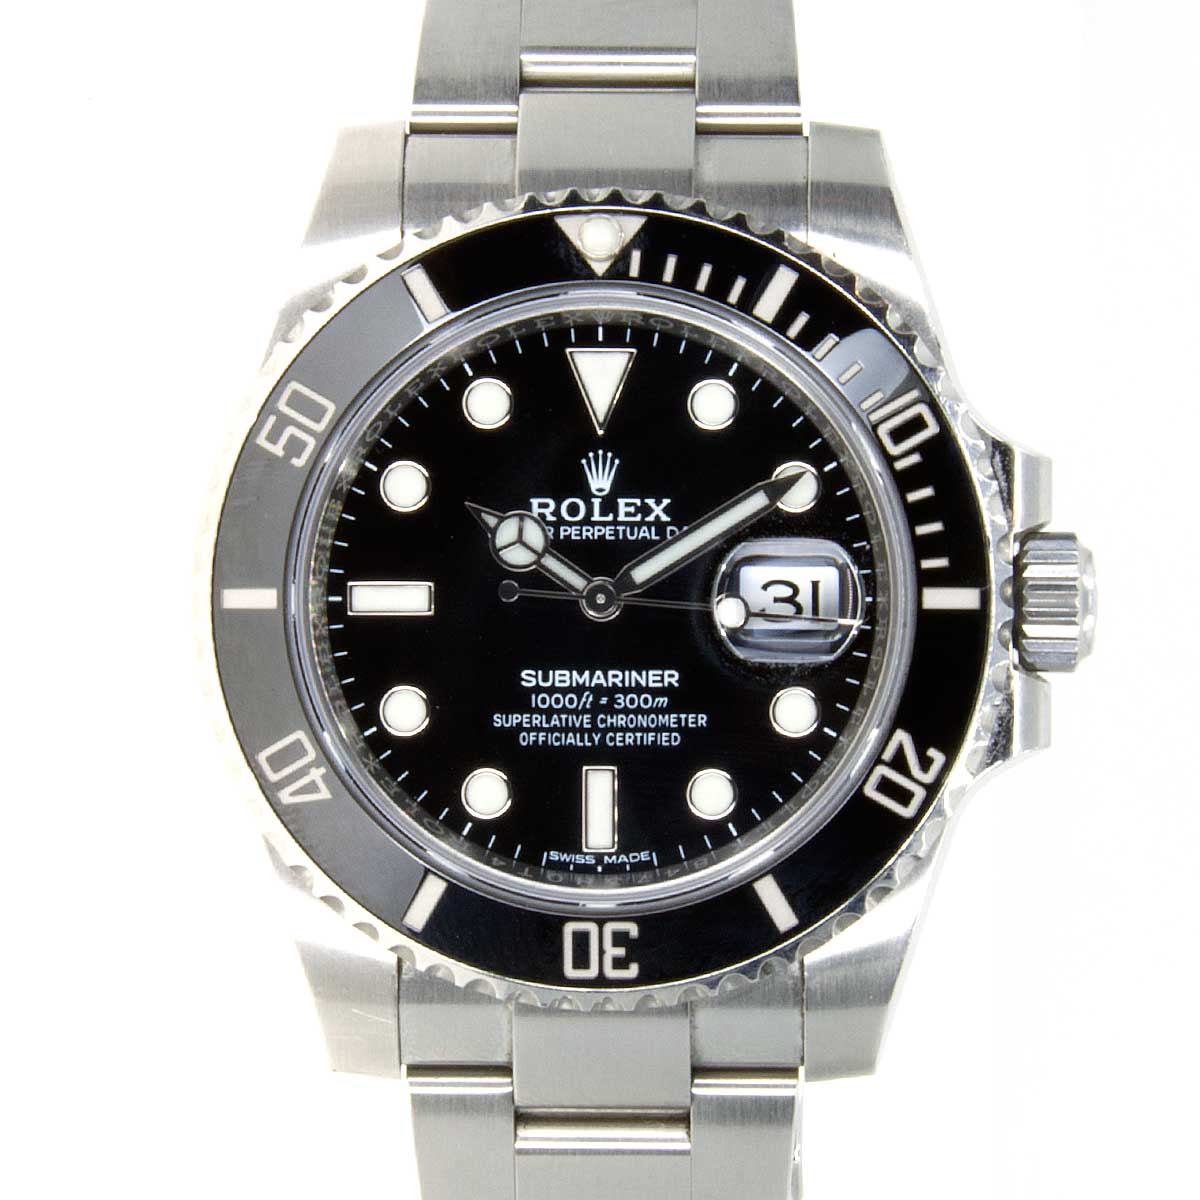 Rolex Submariner Date Ref. 116610 40mm Green Dial Stainless Steel